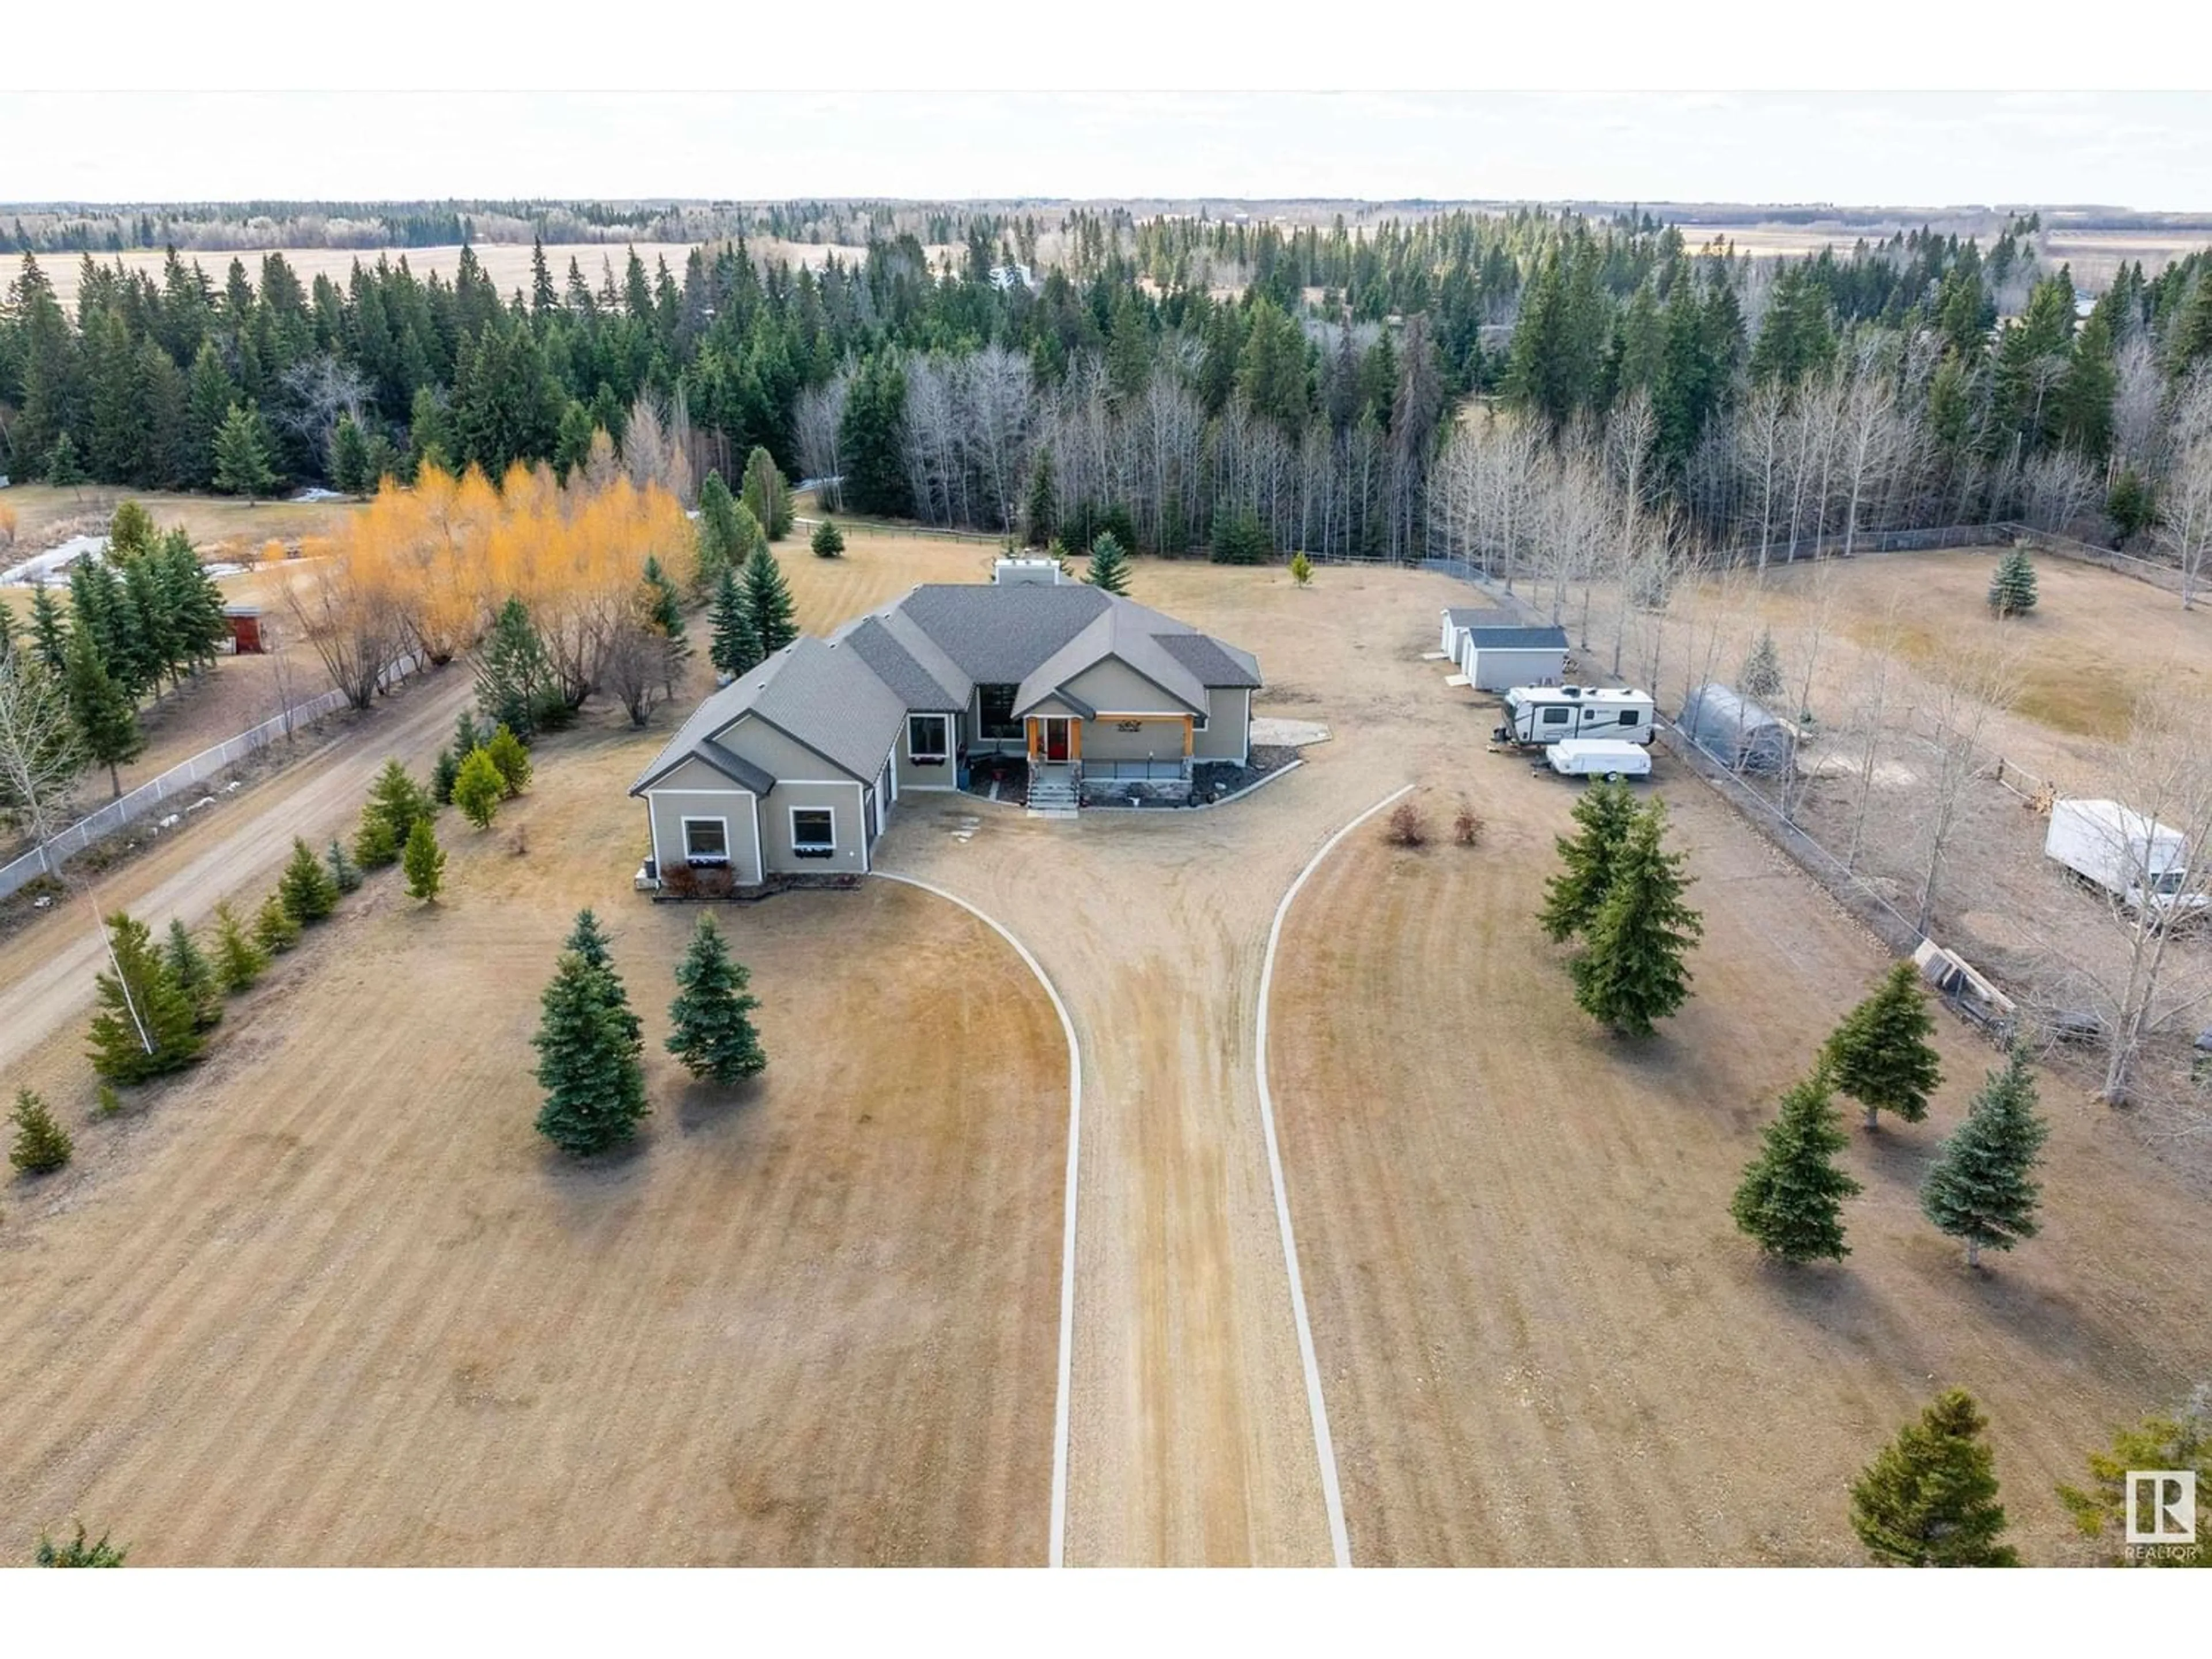 Frontside or backside of a home for ##50 242075 Twp 472, Rural Wetaskiwin County Alberta T0C1Z0